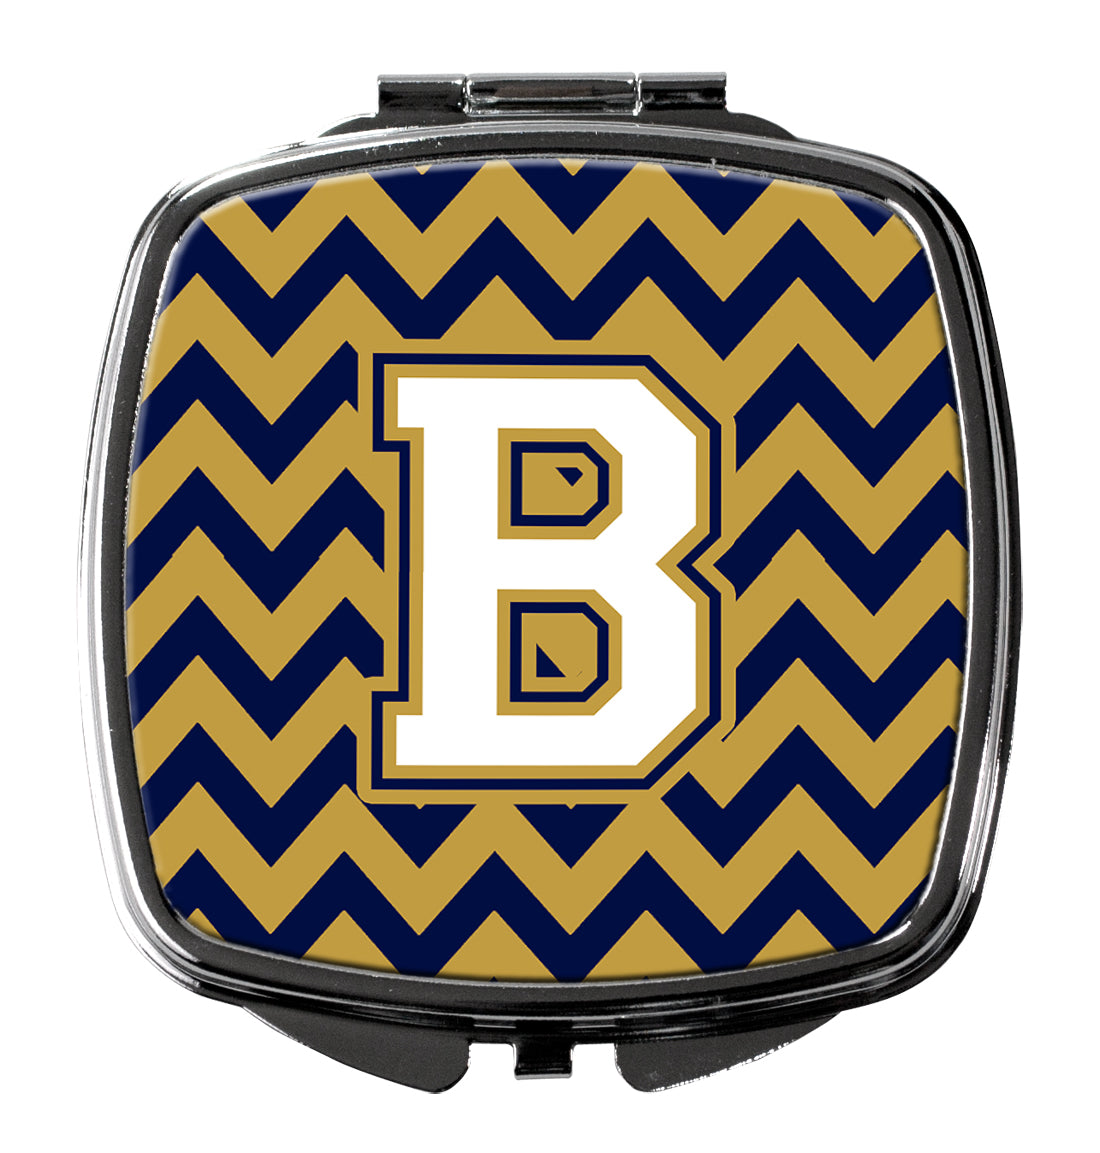 Letter B Chevron Navy Blue and Gold Compact Mirror CJ1057-BSCM